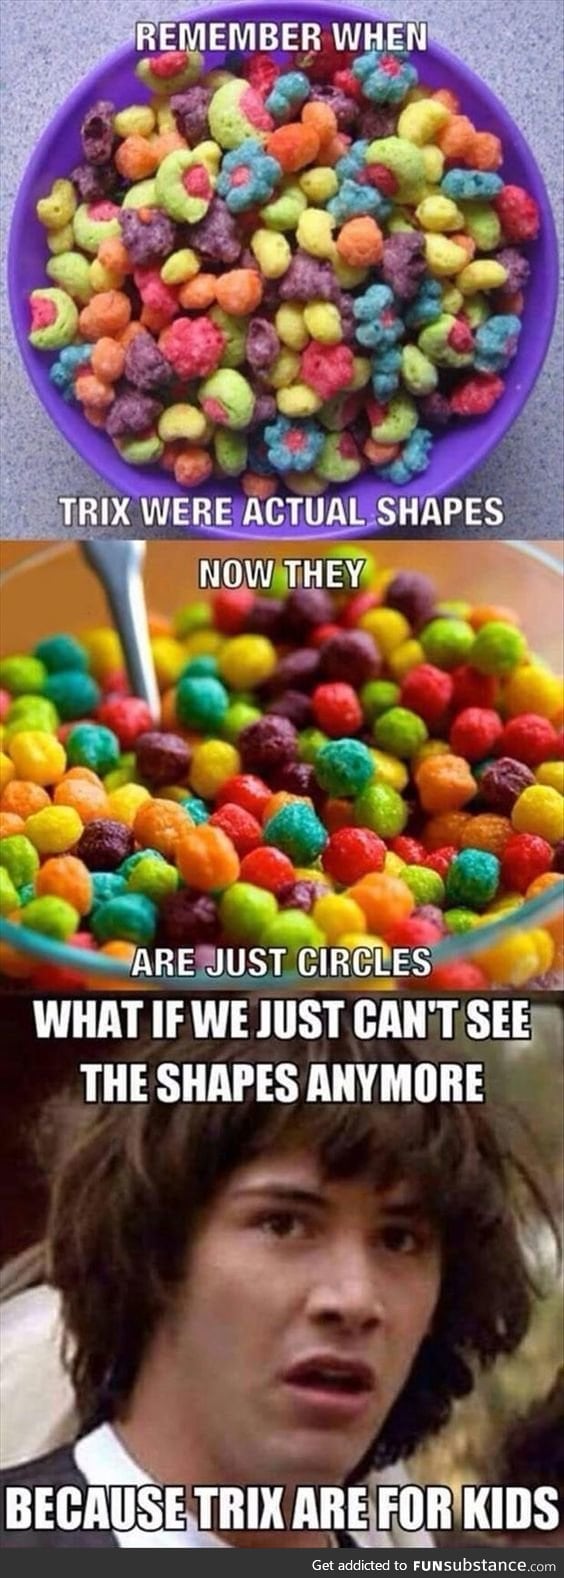 Haven't eaten Trix in a long while , i didn't know they changed them to circles :(